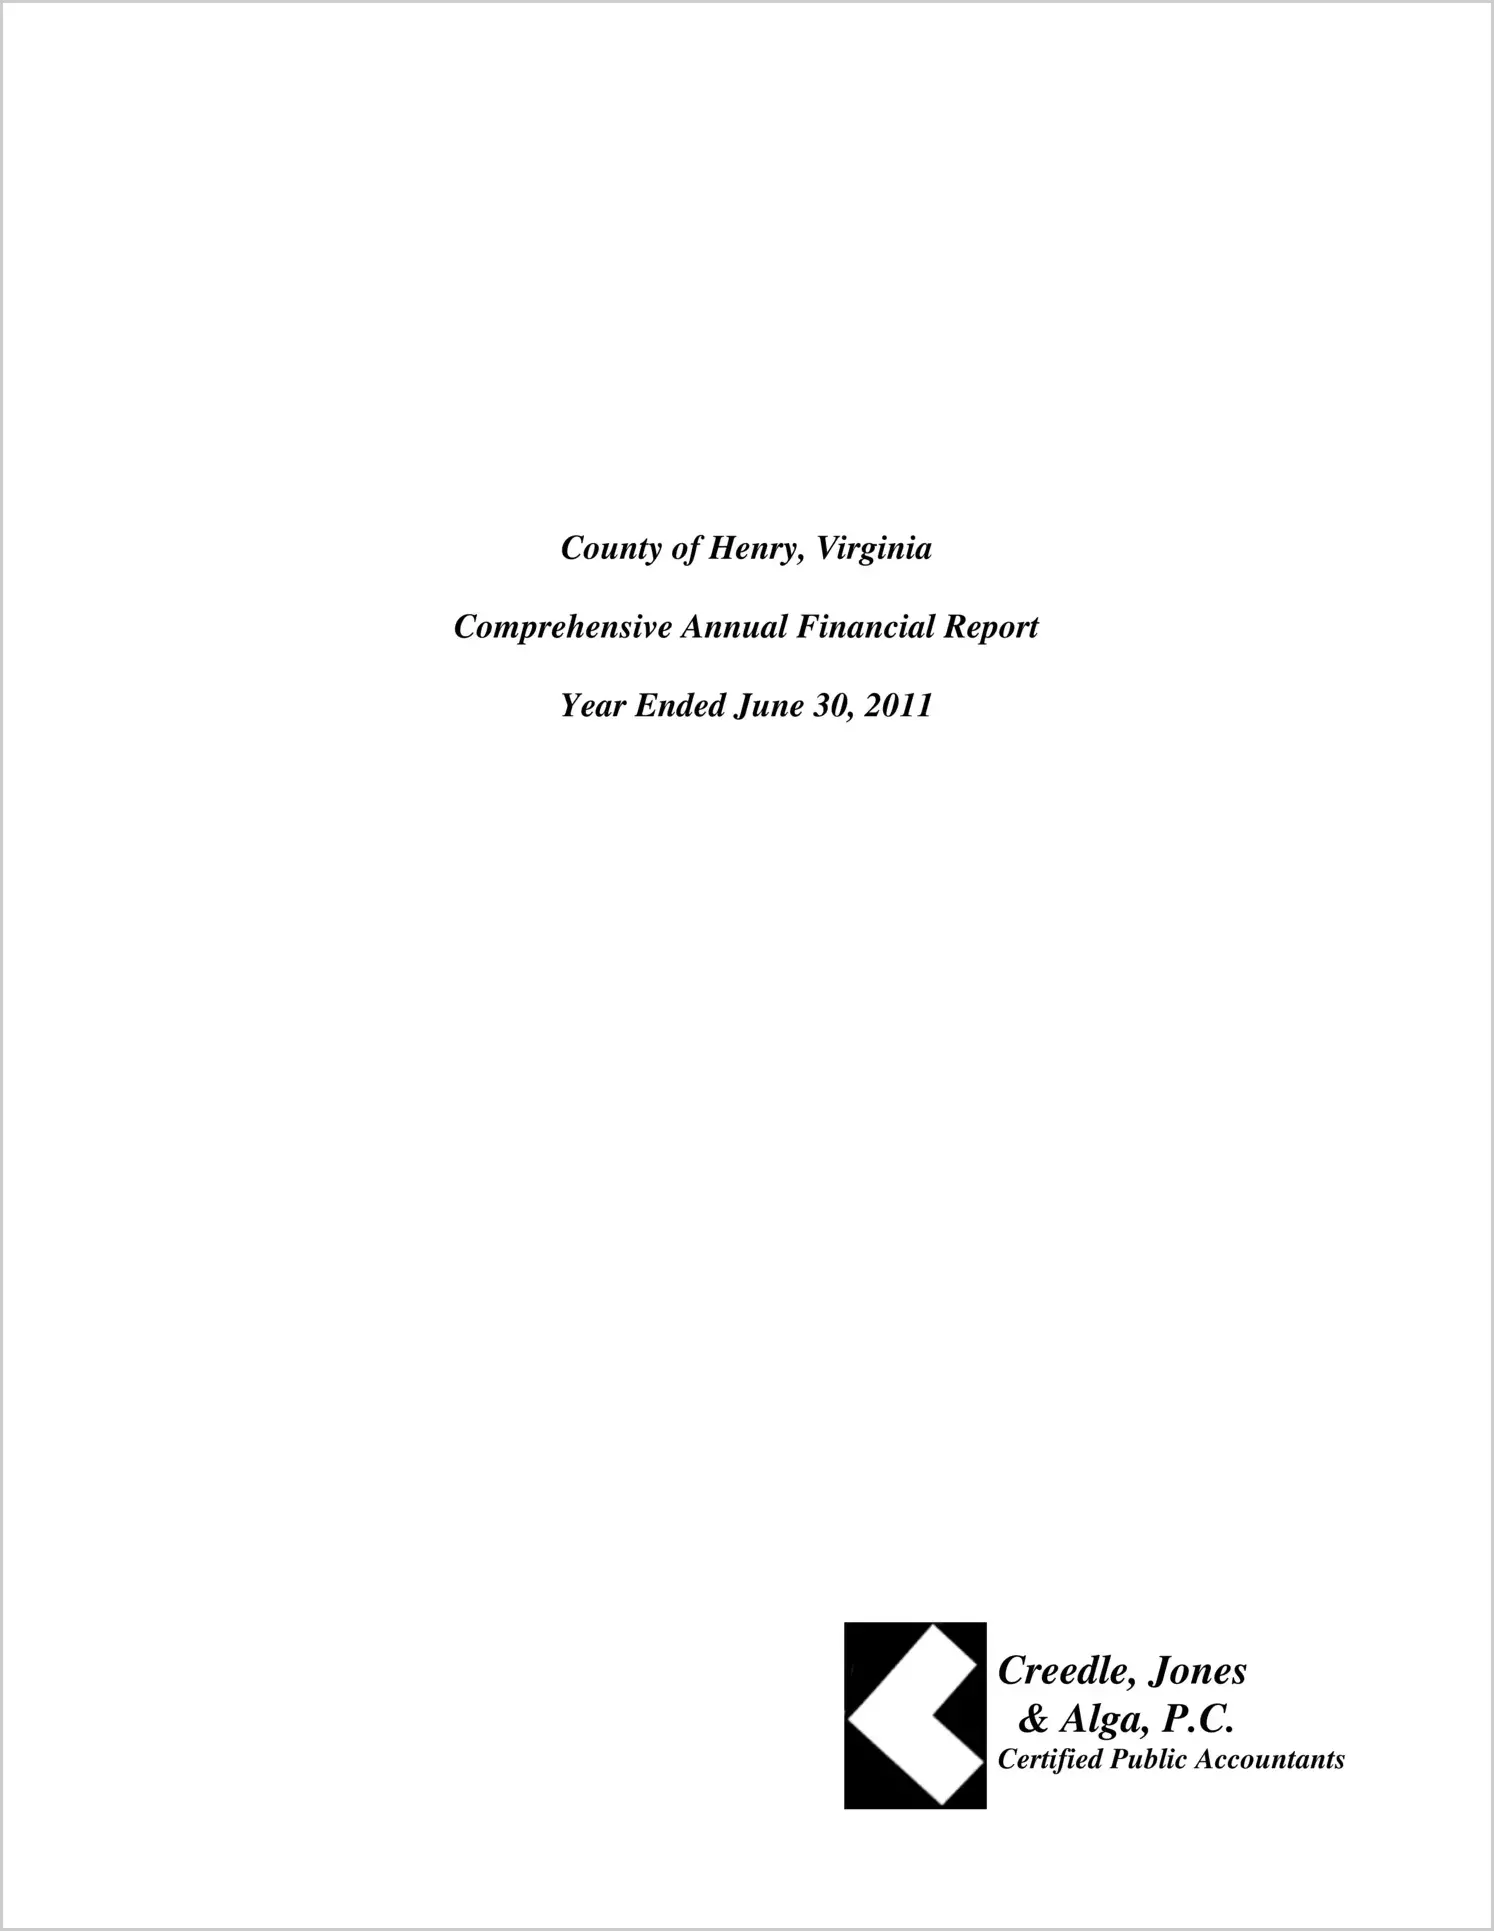 2010 Annual Financial Report for County of Henry